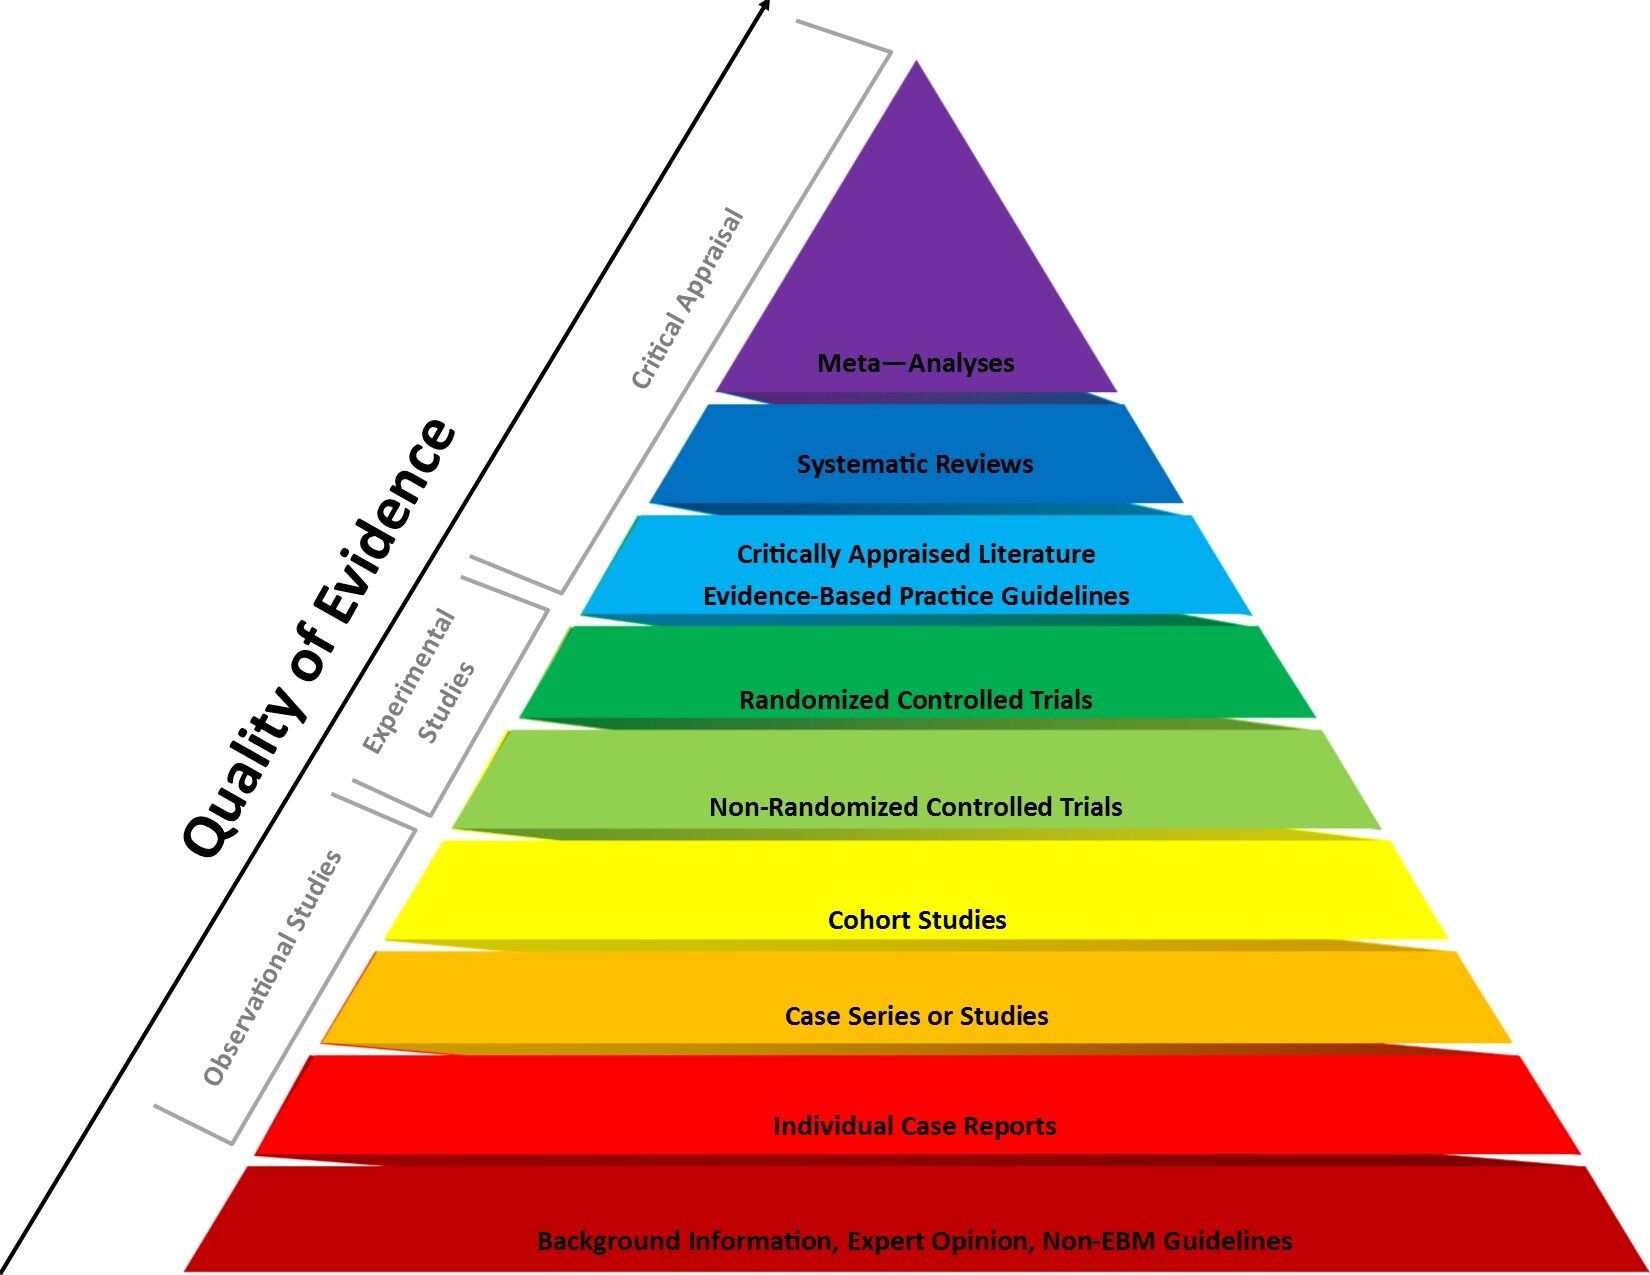 case study hierarchy of evidence